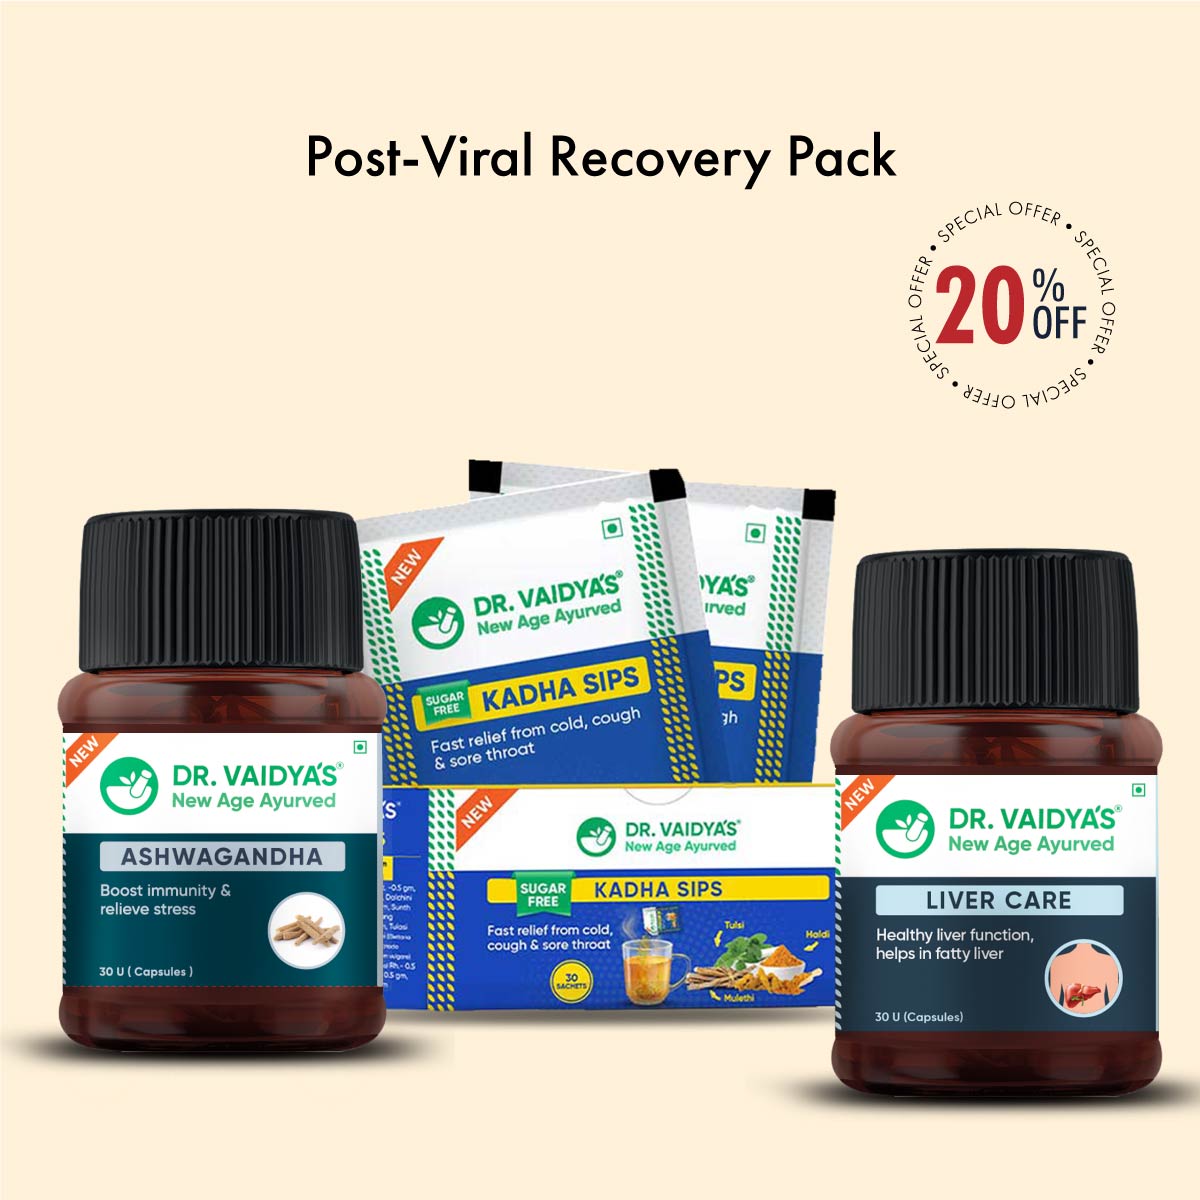 Post-Viral Recovery Pack